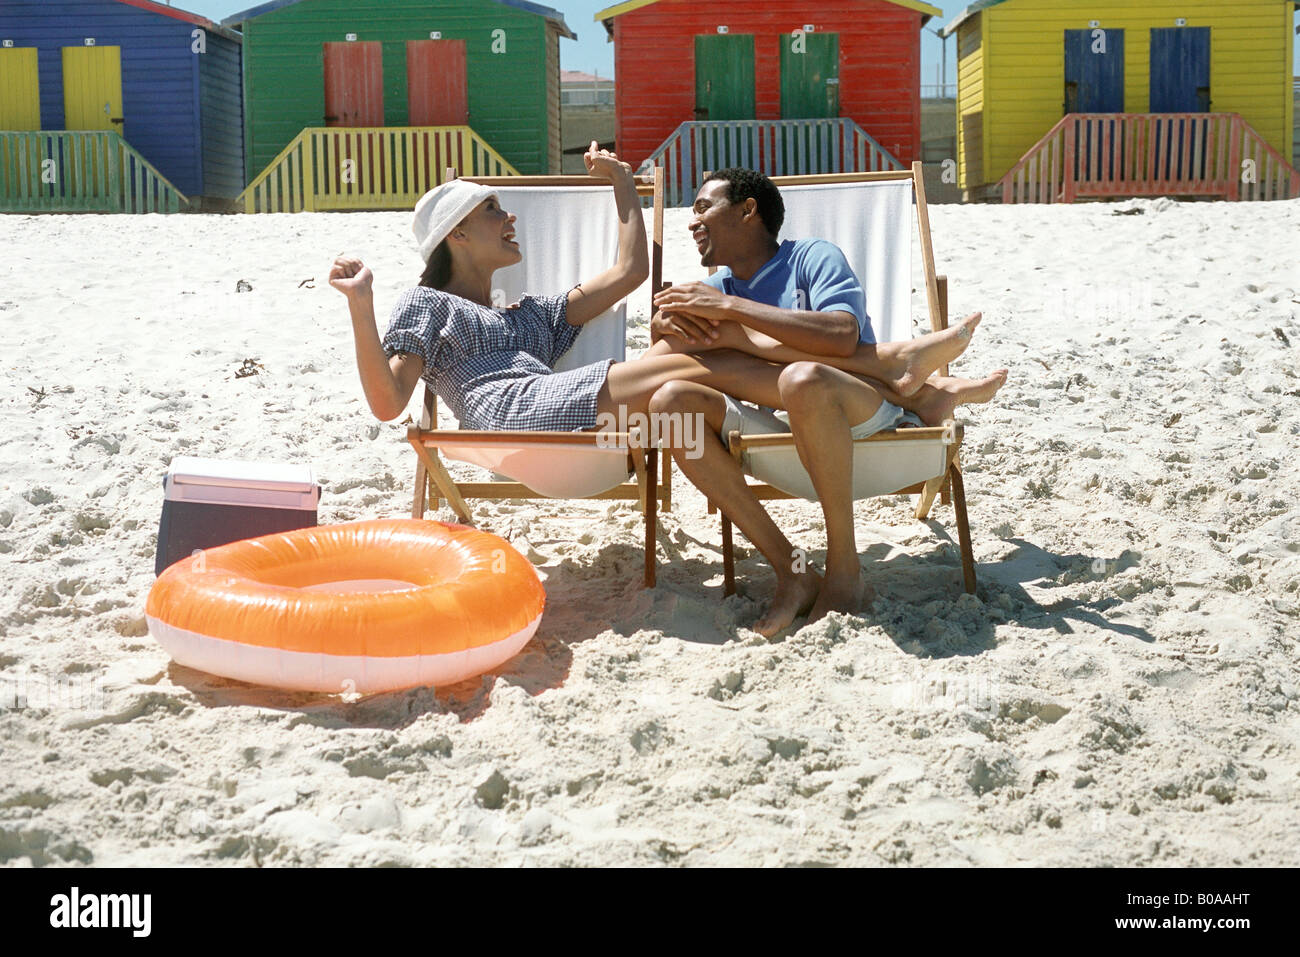 Couple sitting in lounge chairs at the beach, smiling, woman's legs on man's lap Stock Photo